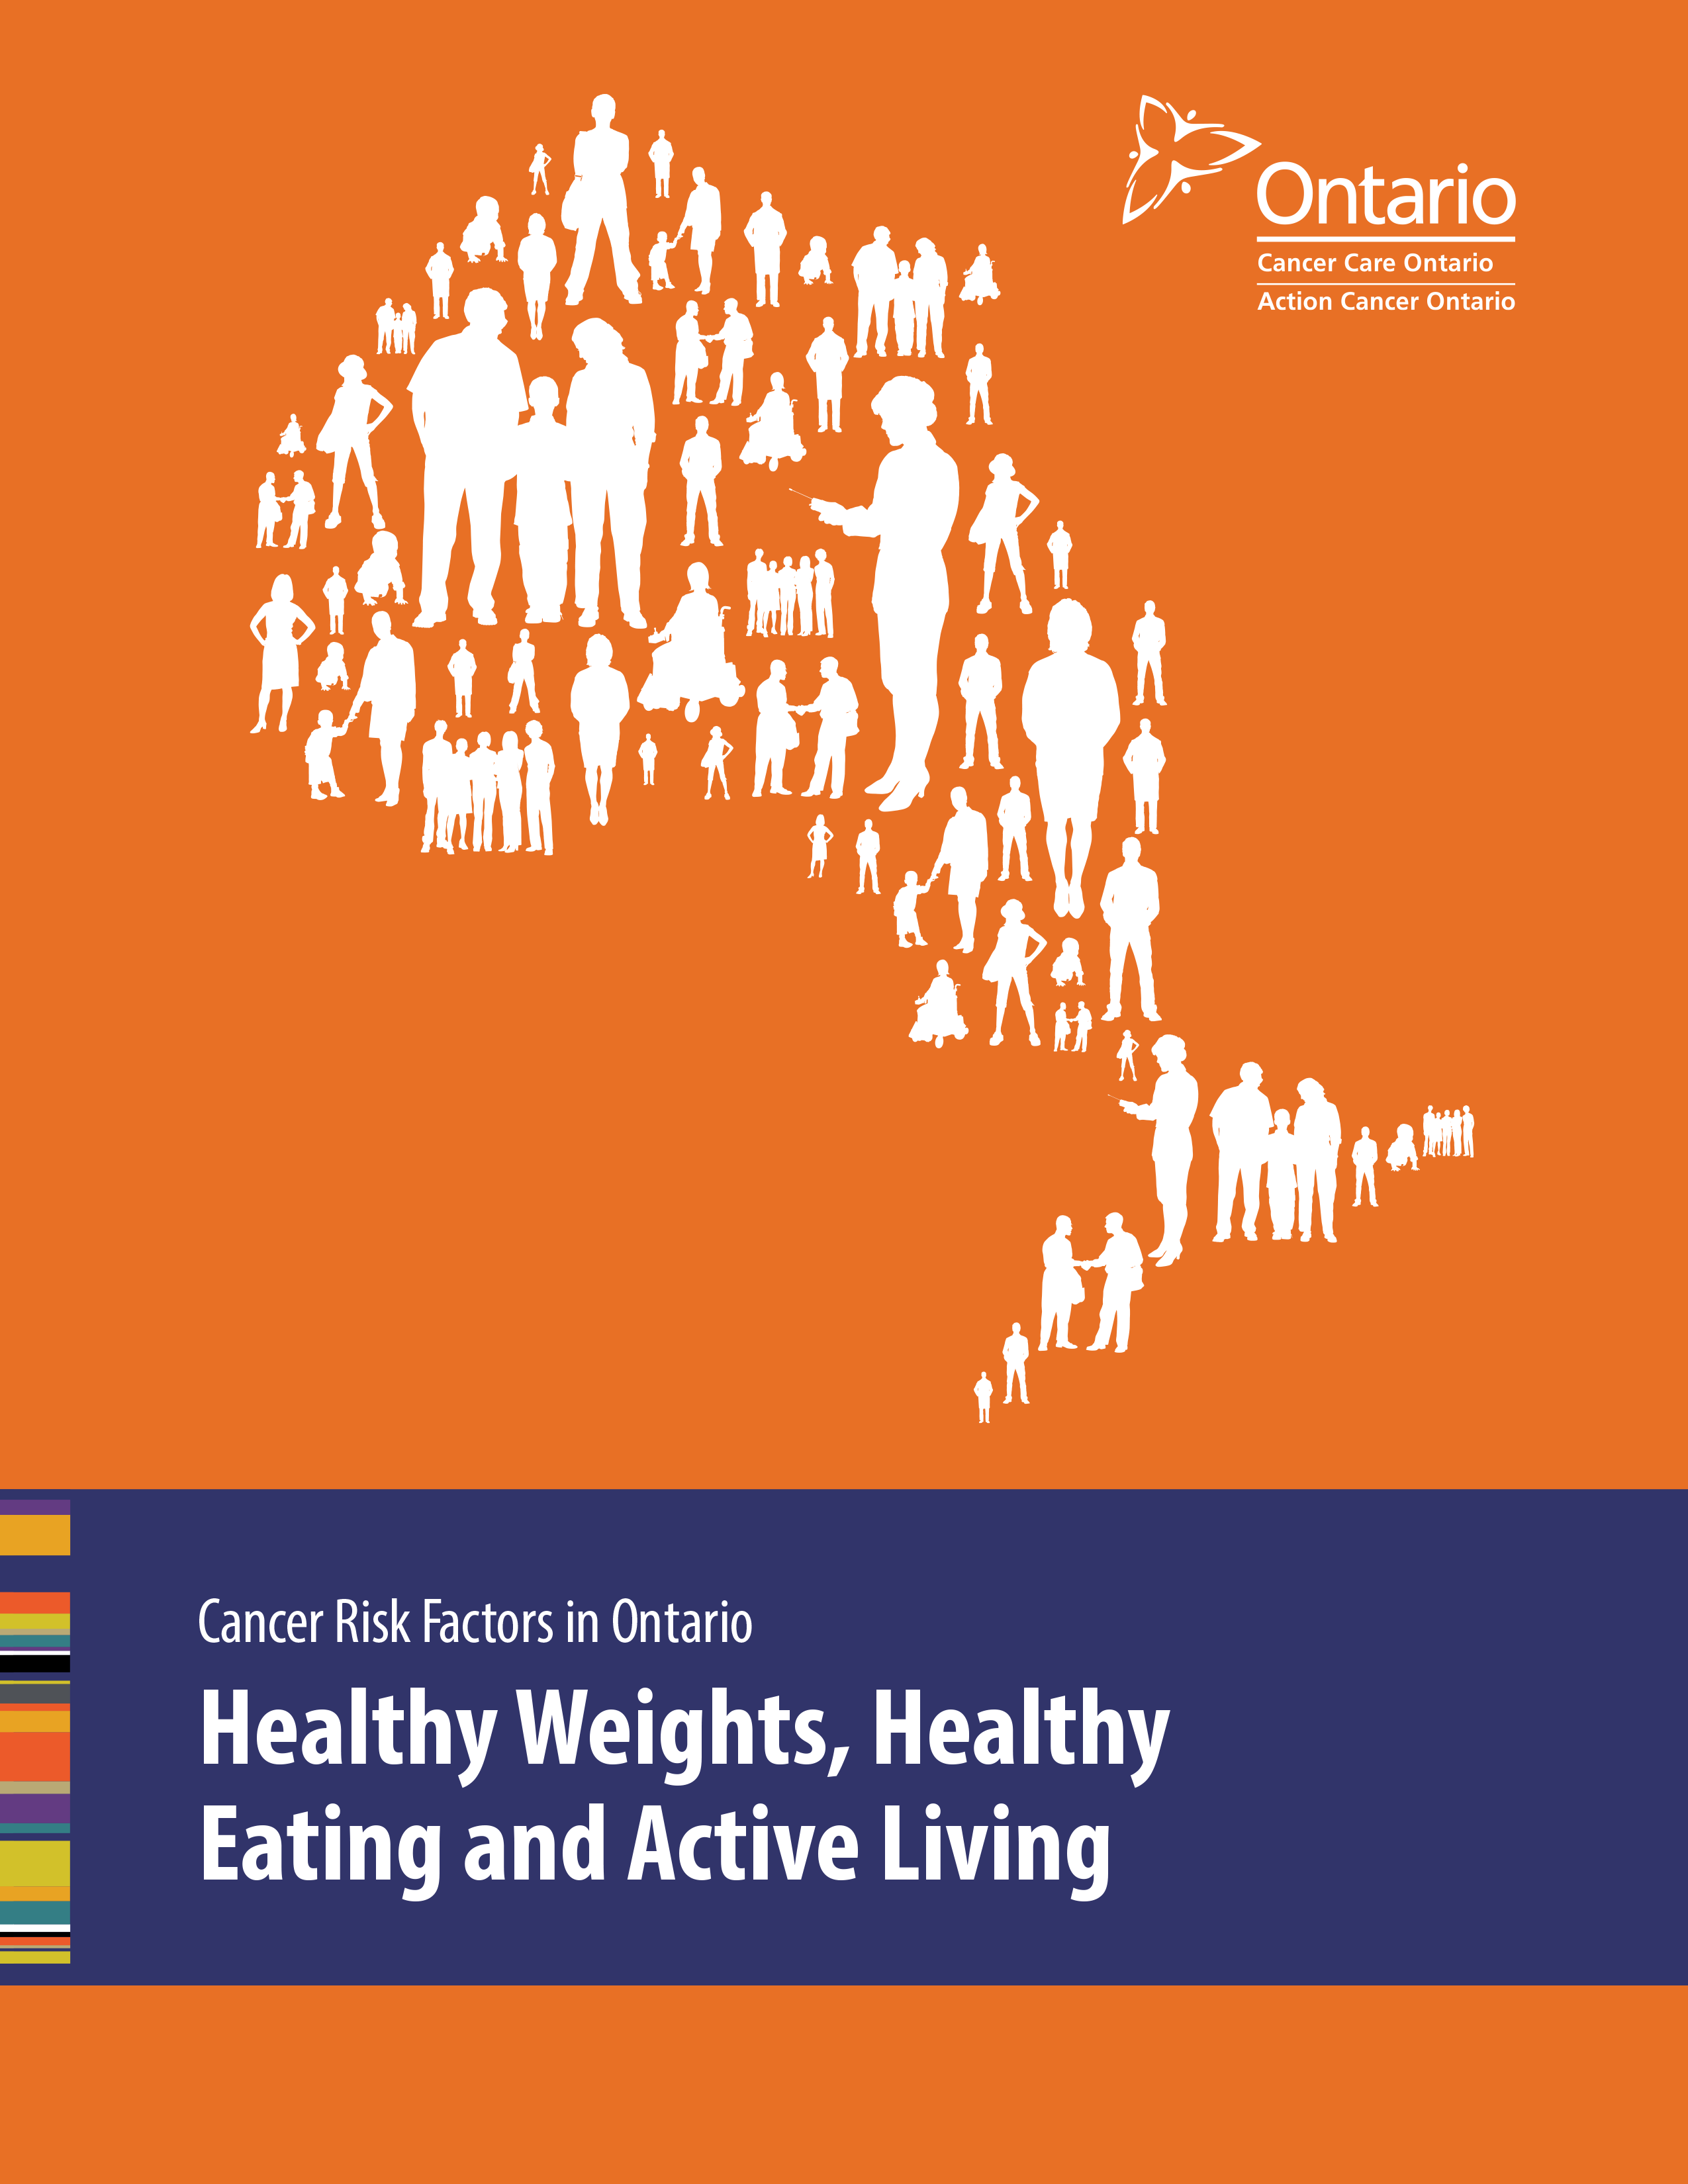 Cancer Risk Factors in Ontario: Healthy Weights, Healthy Eating and Active Living